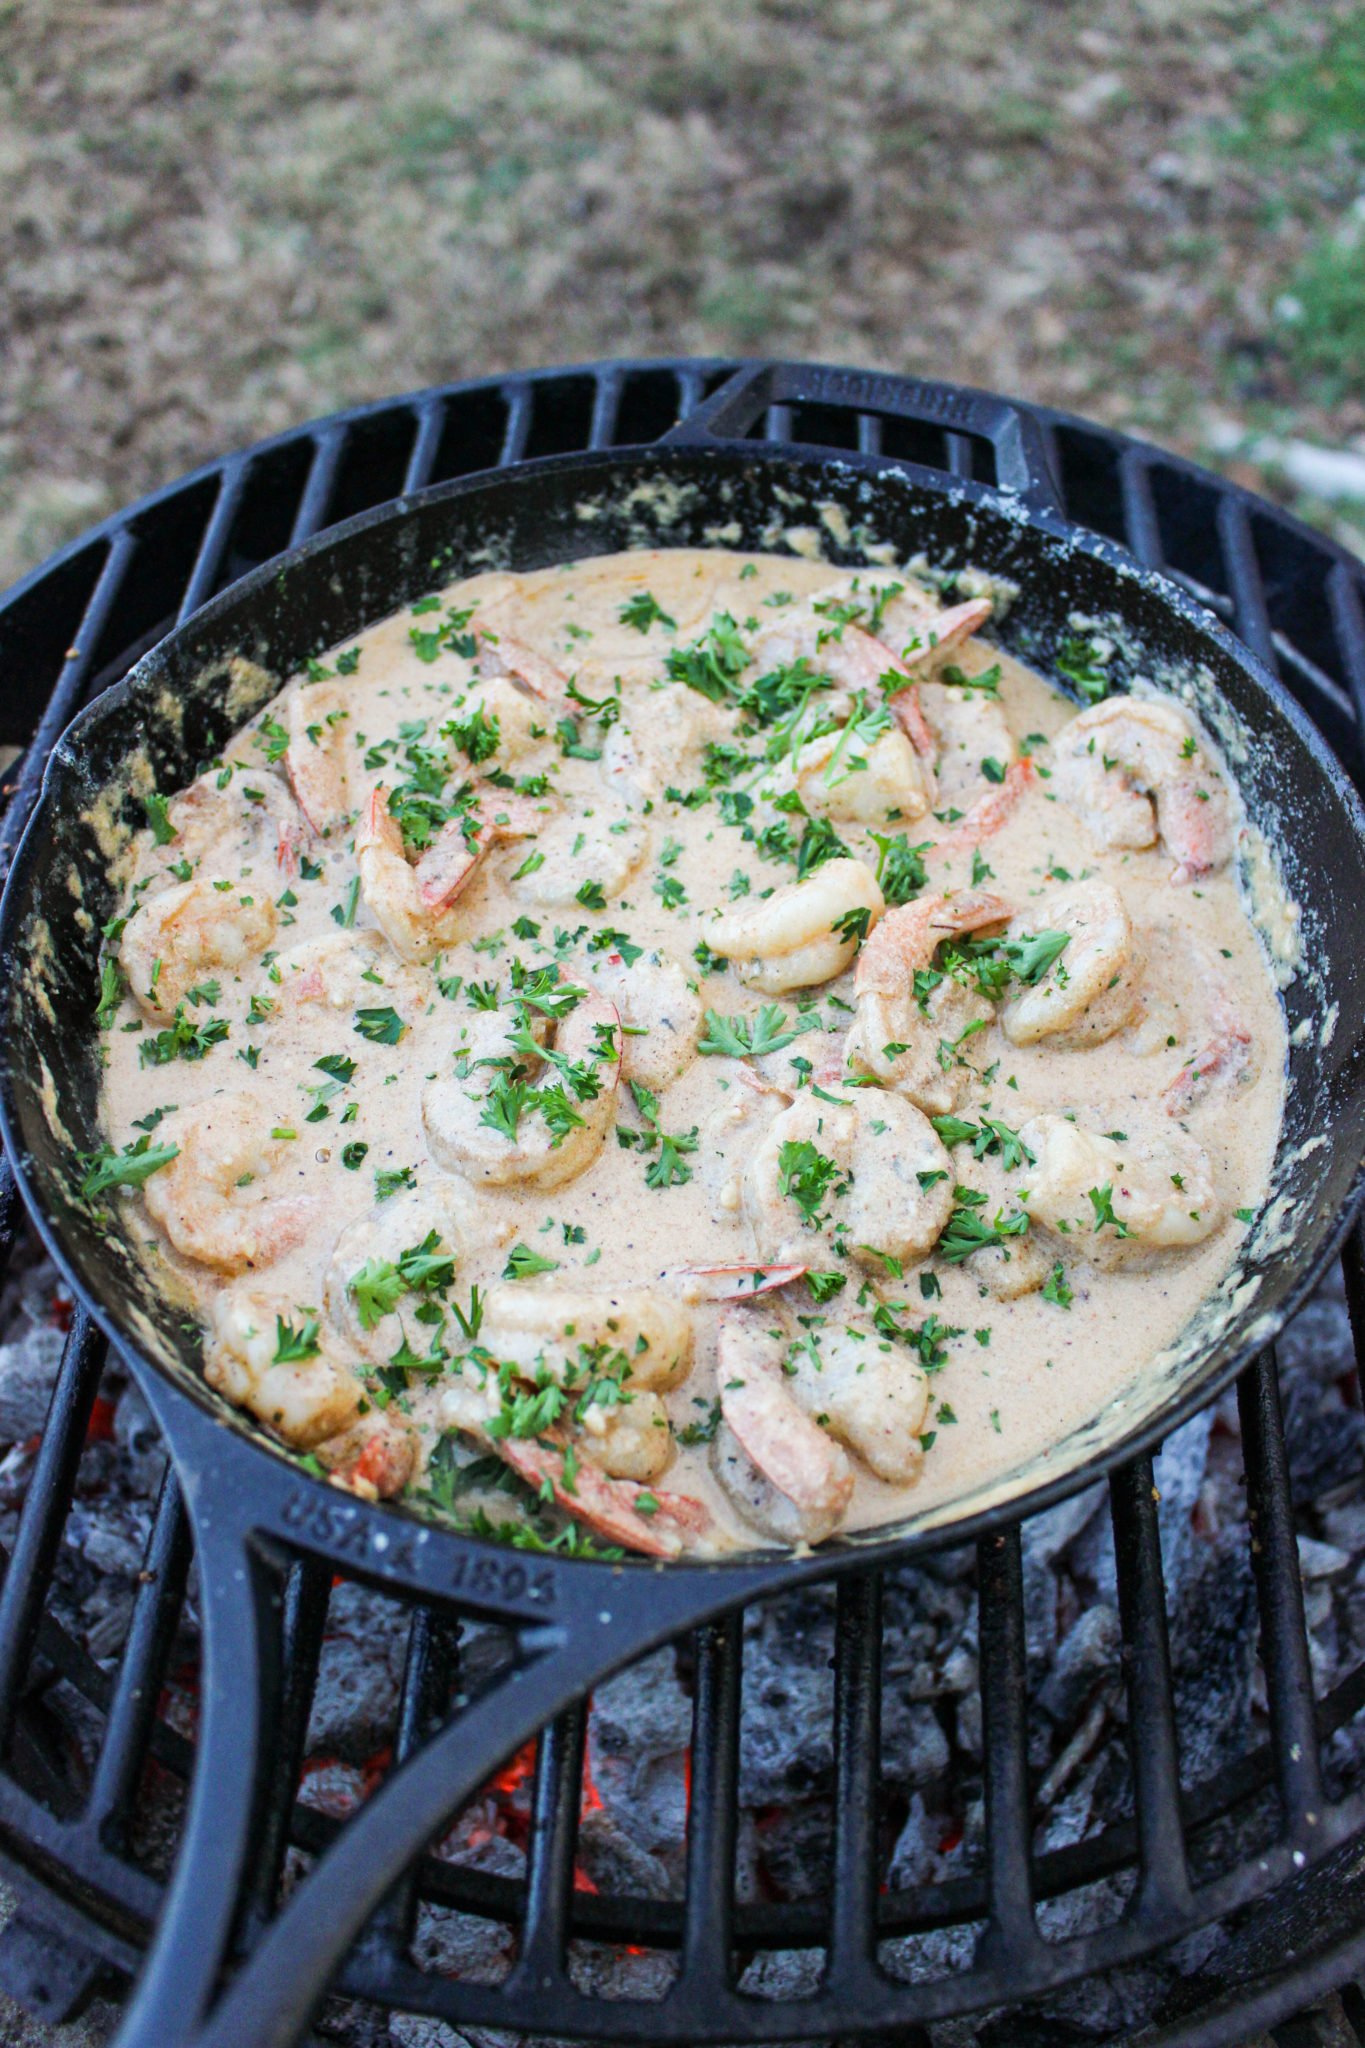 Creamy Chipotle Shrimp garnished with parsley.